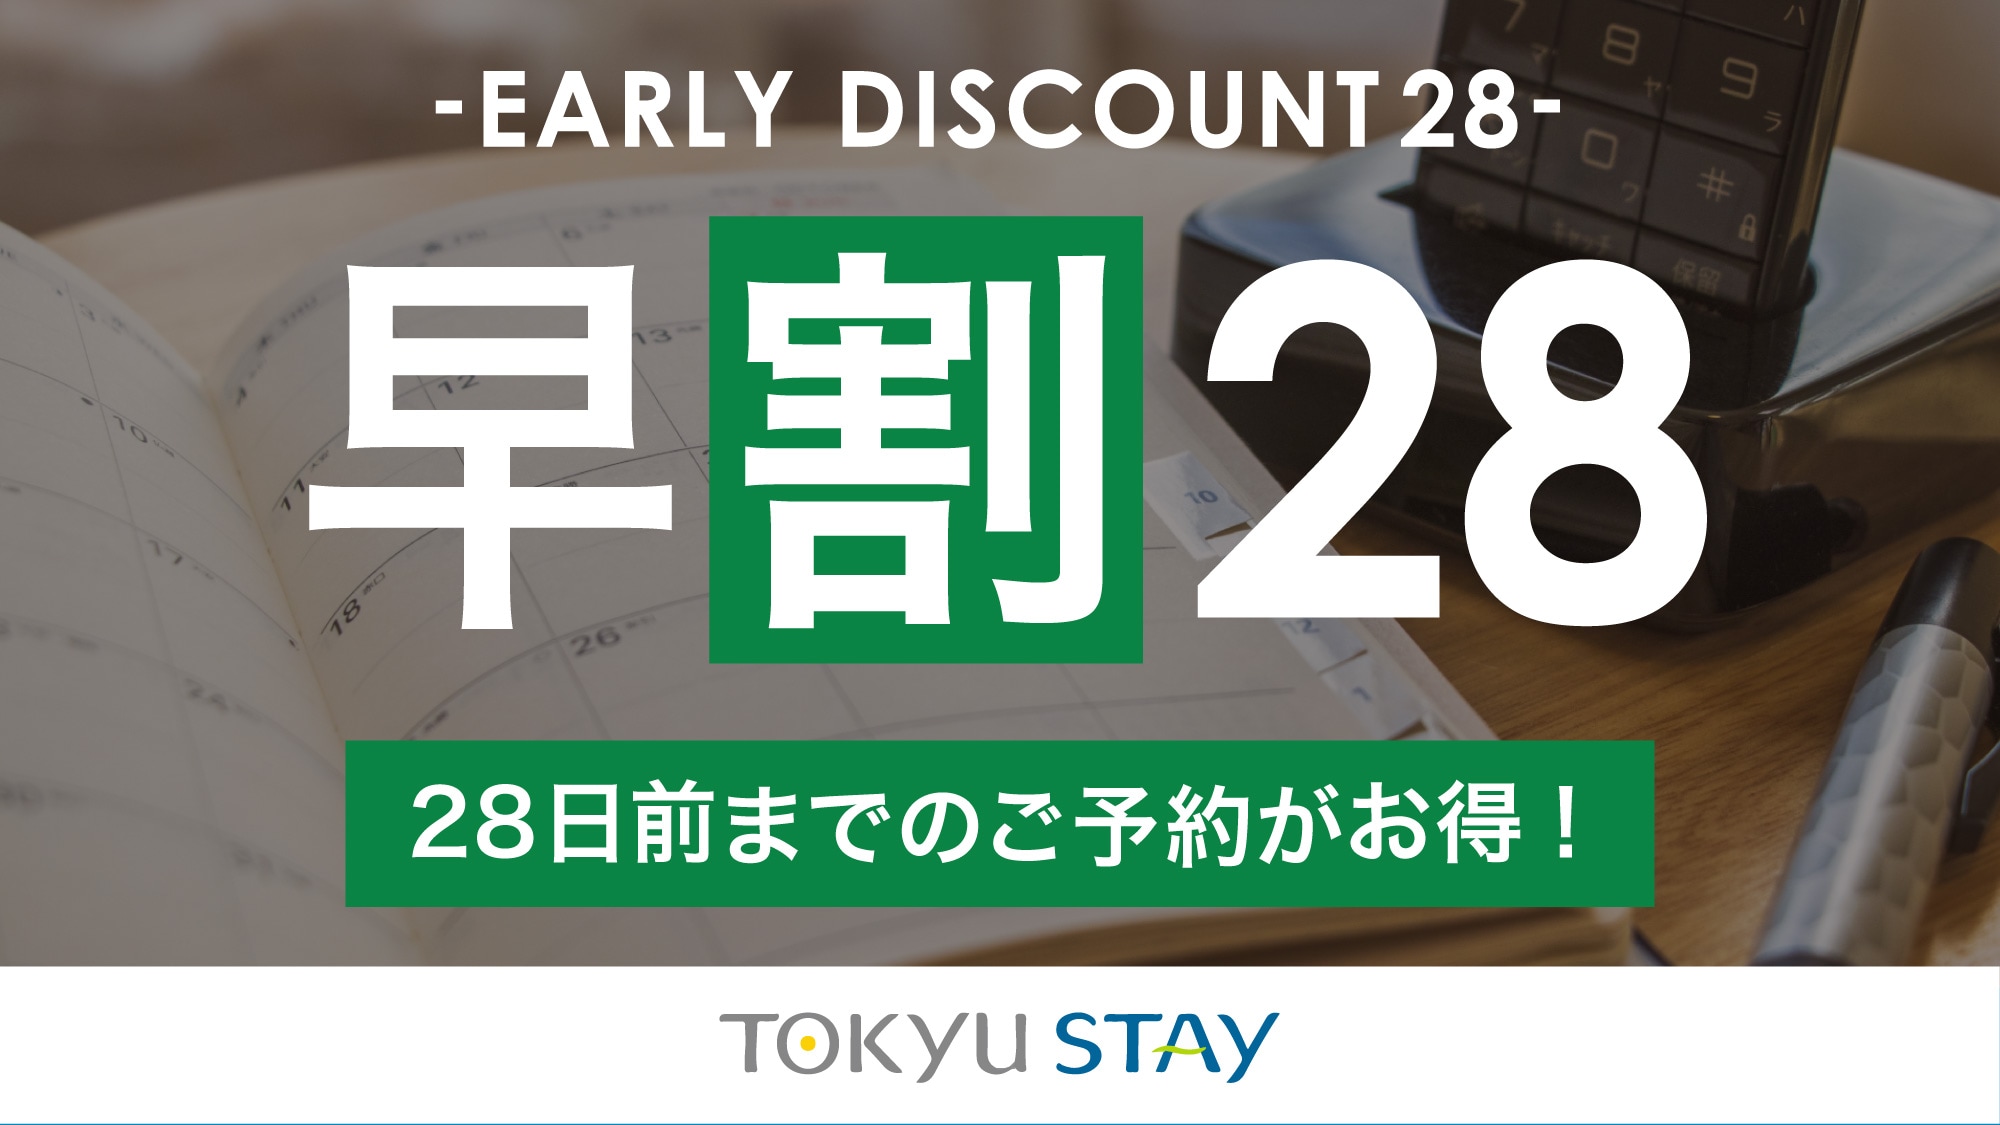 ■[Early Discount 28 Plan] We recommend making a reservation at least 28 days before your stay! Save money by booking early